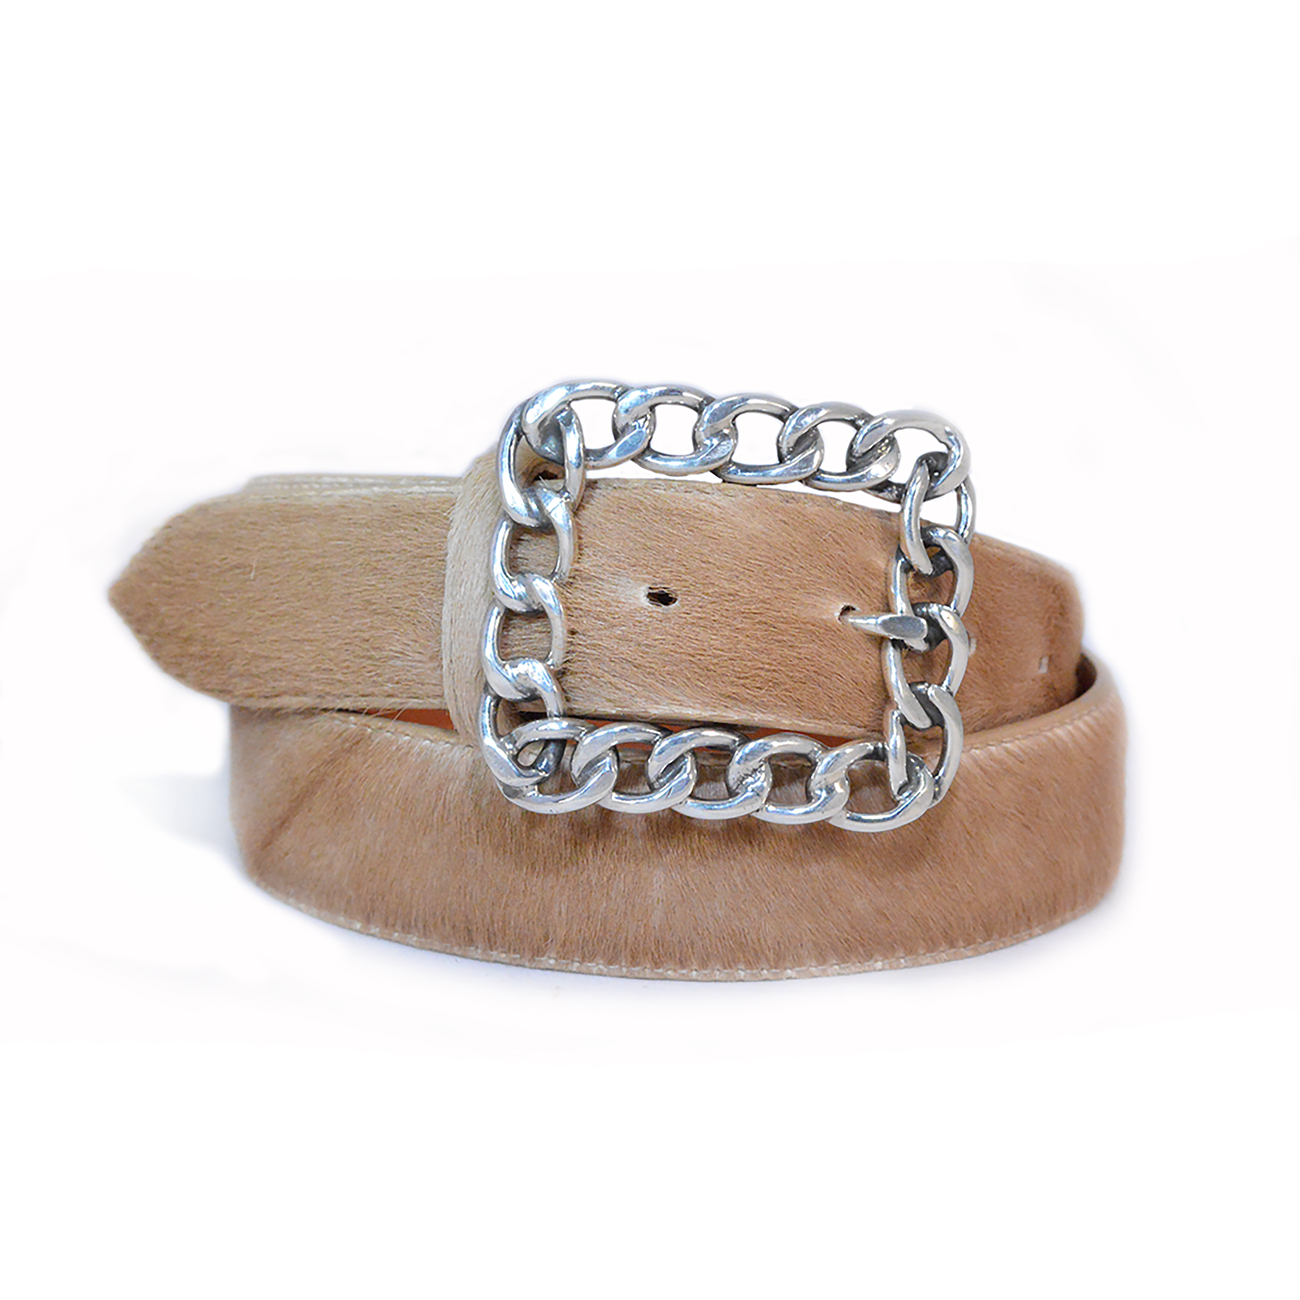 CHAIN LINK BUCKLE (M507)